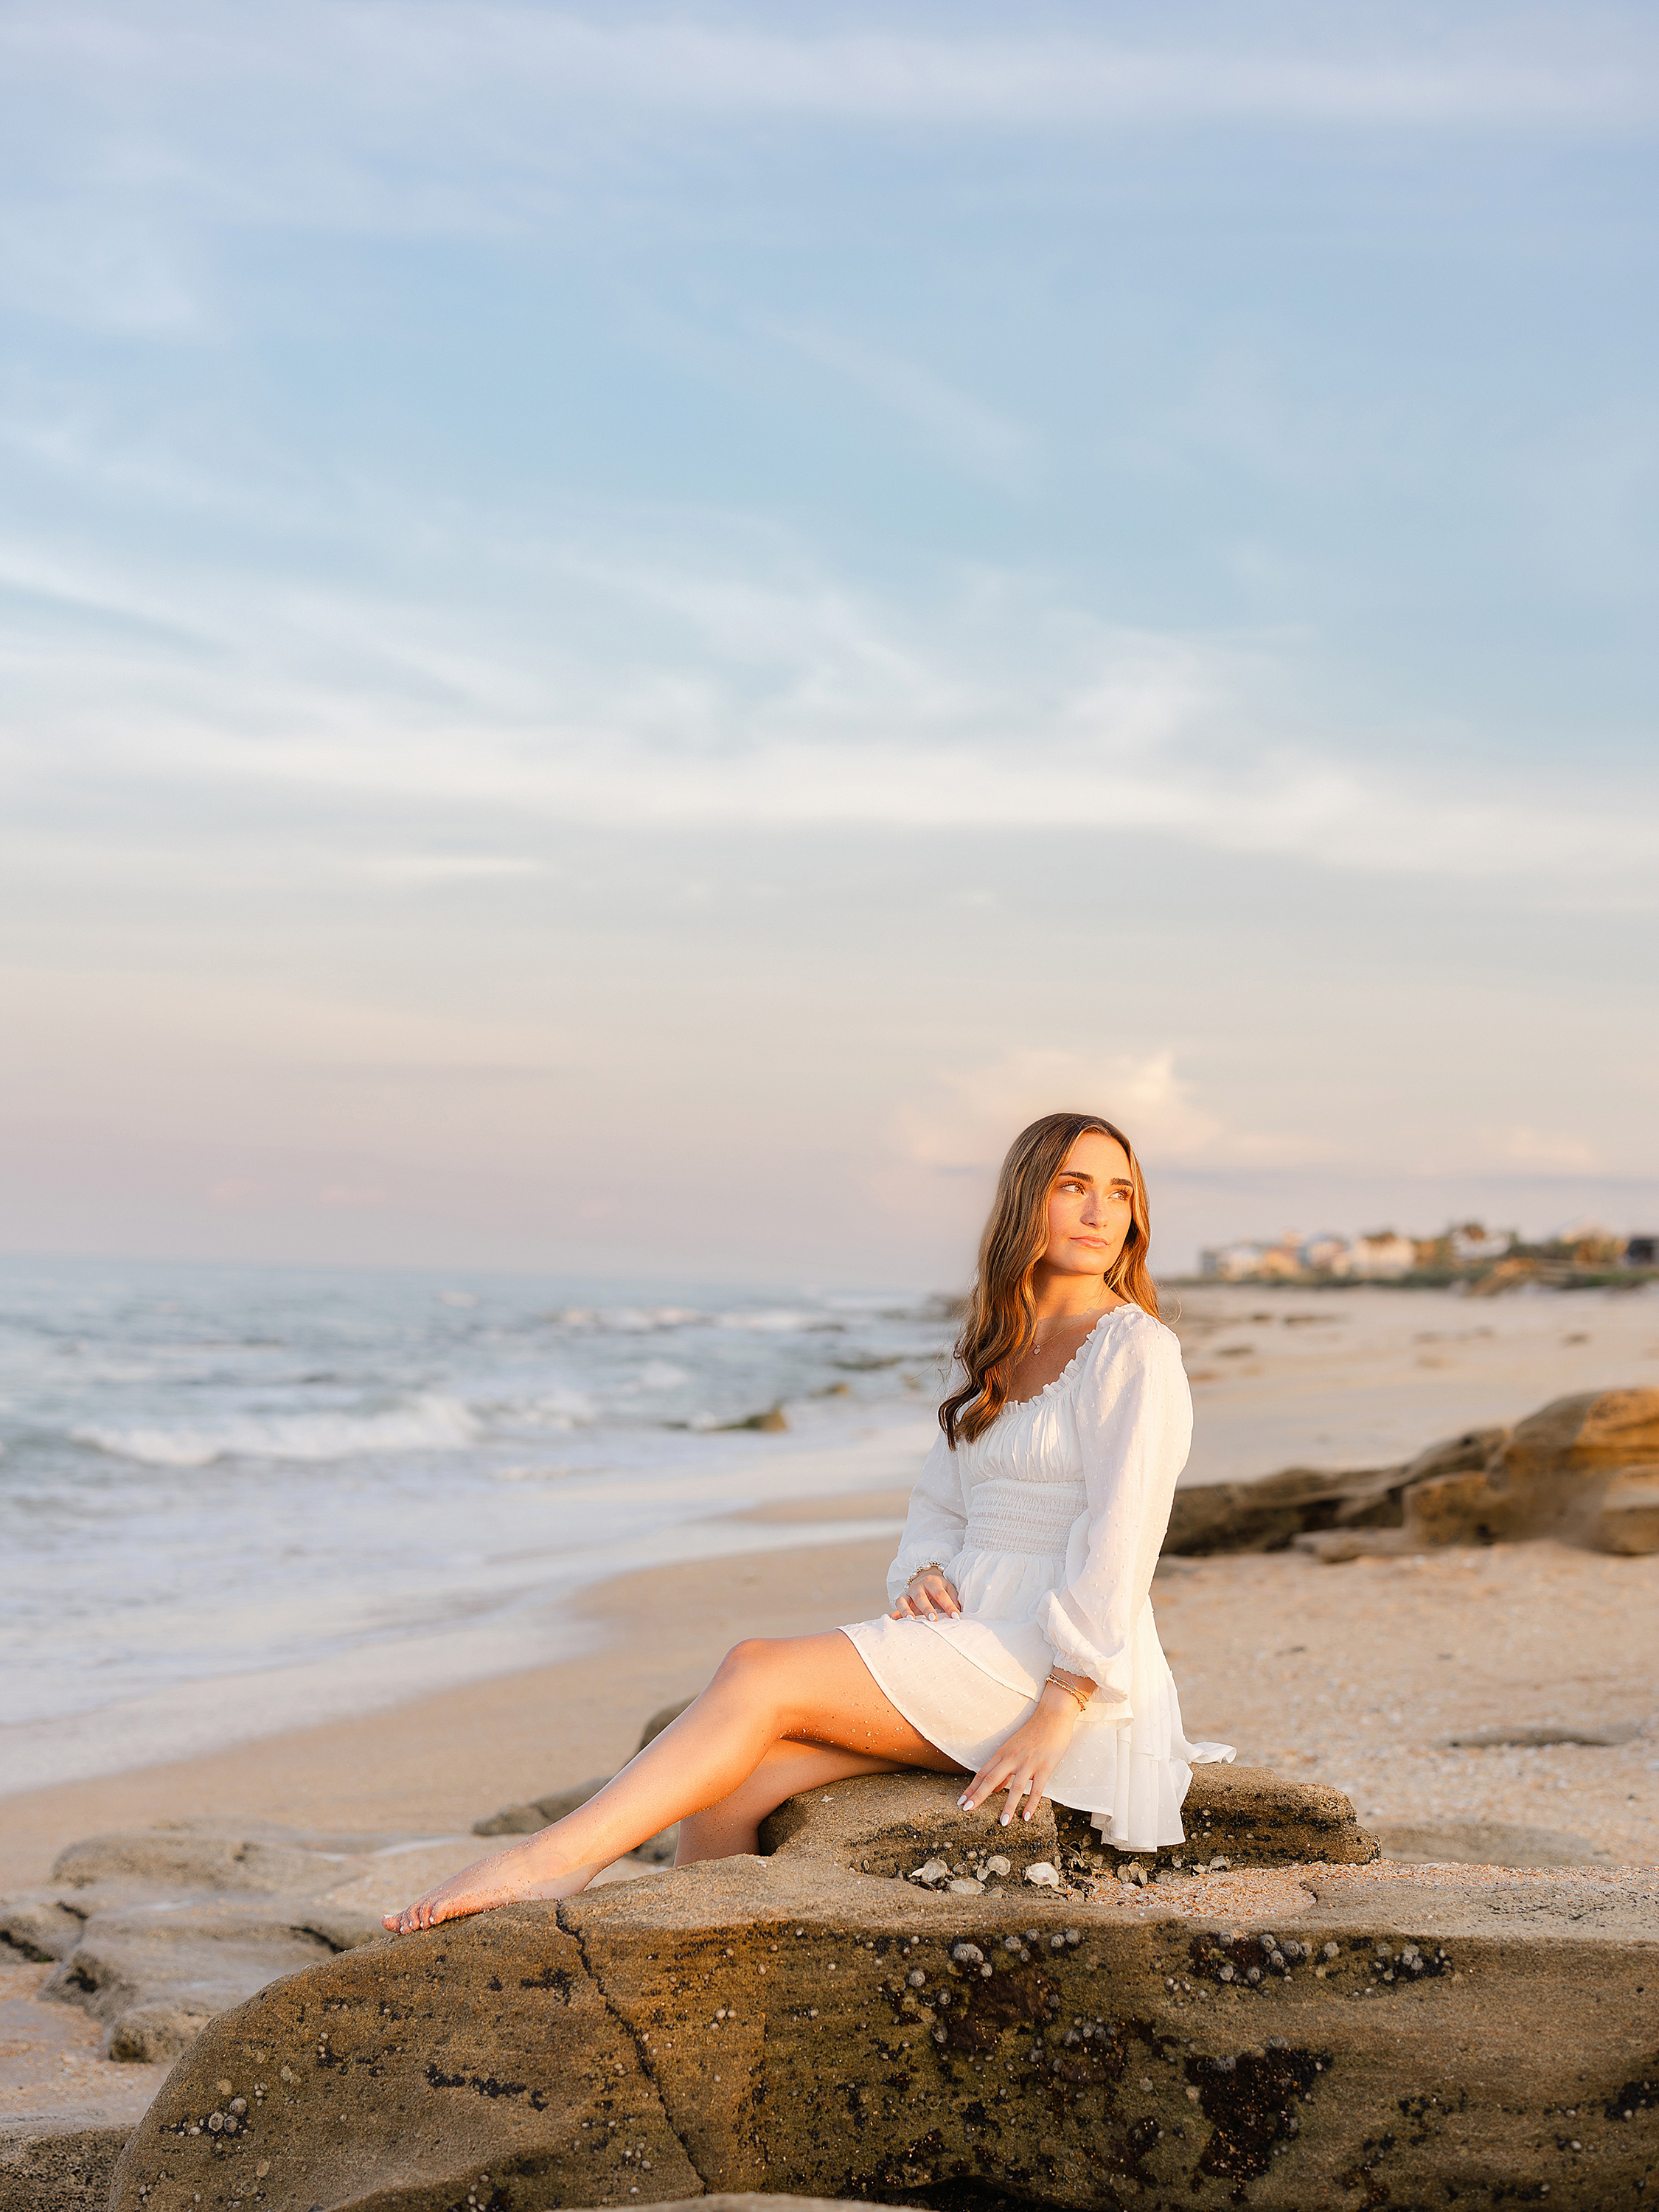 Beach portrait of young woman in white dress near the shoreline during a pastel sunset.